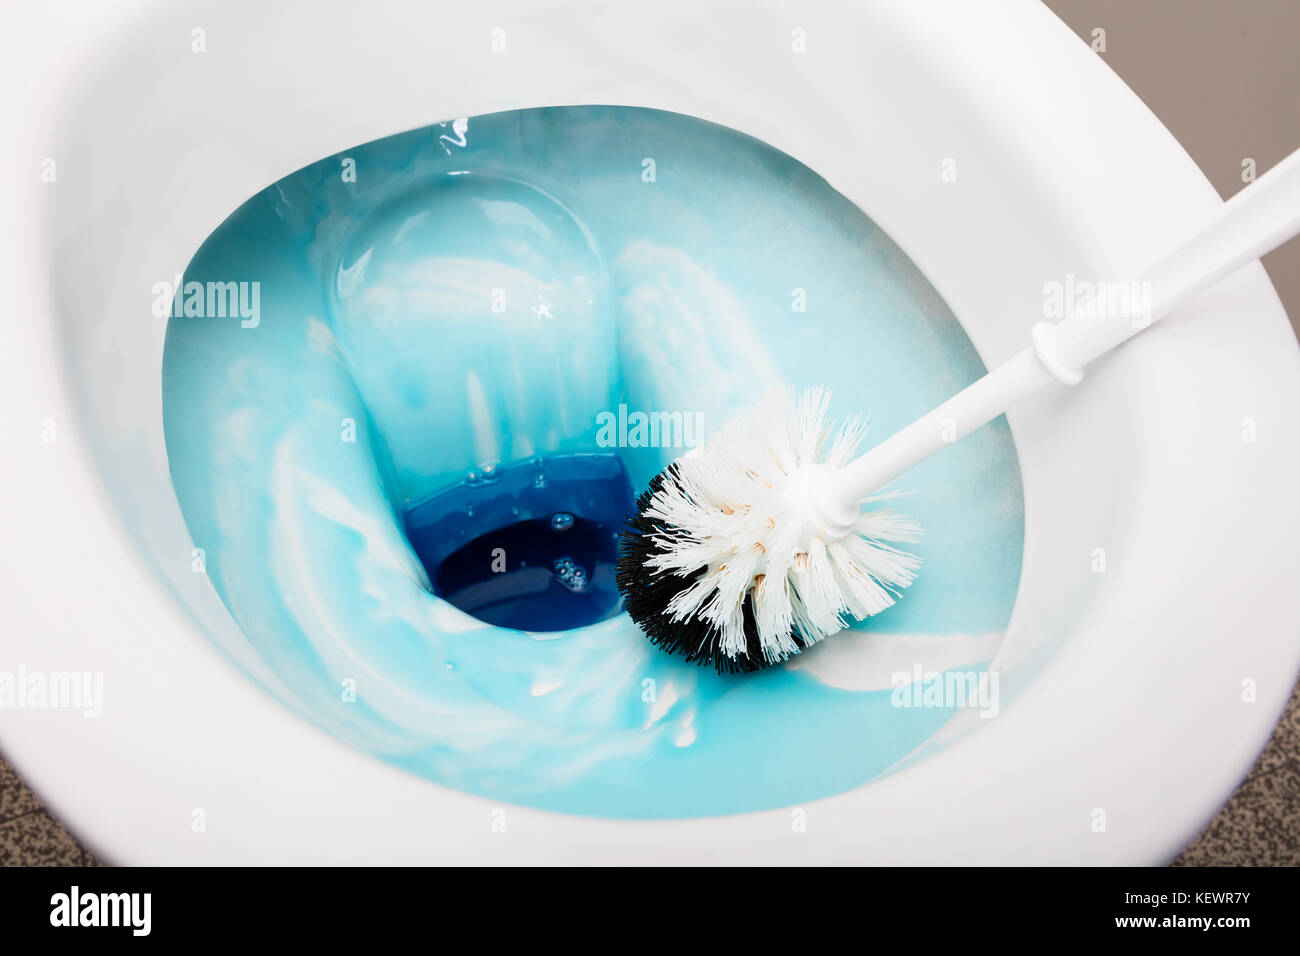 High Angle View Of A Person Cleans A Bathroom Toilet With A Scrub Brush Stock Photo